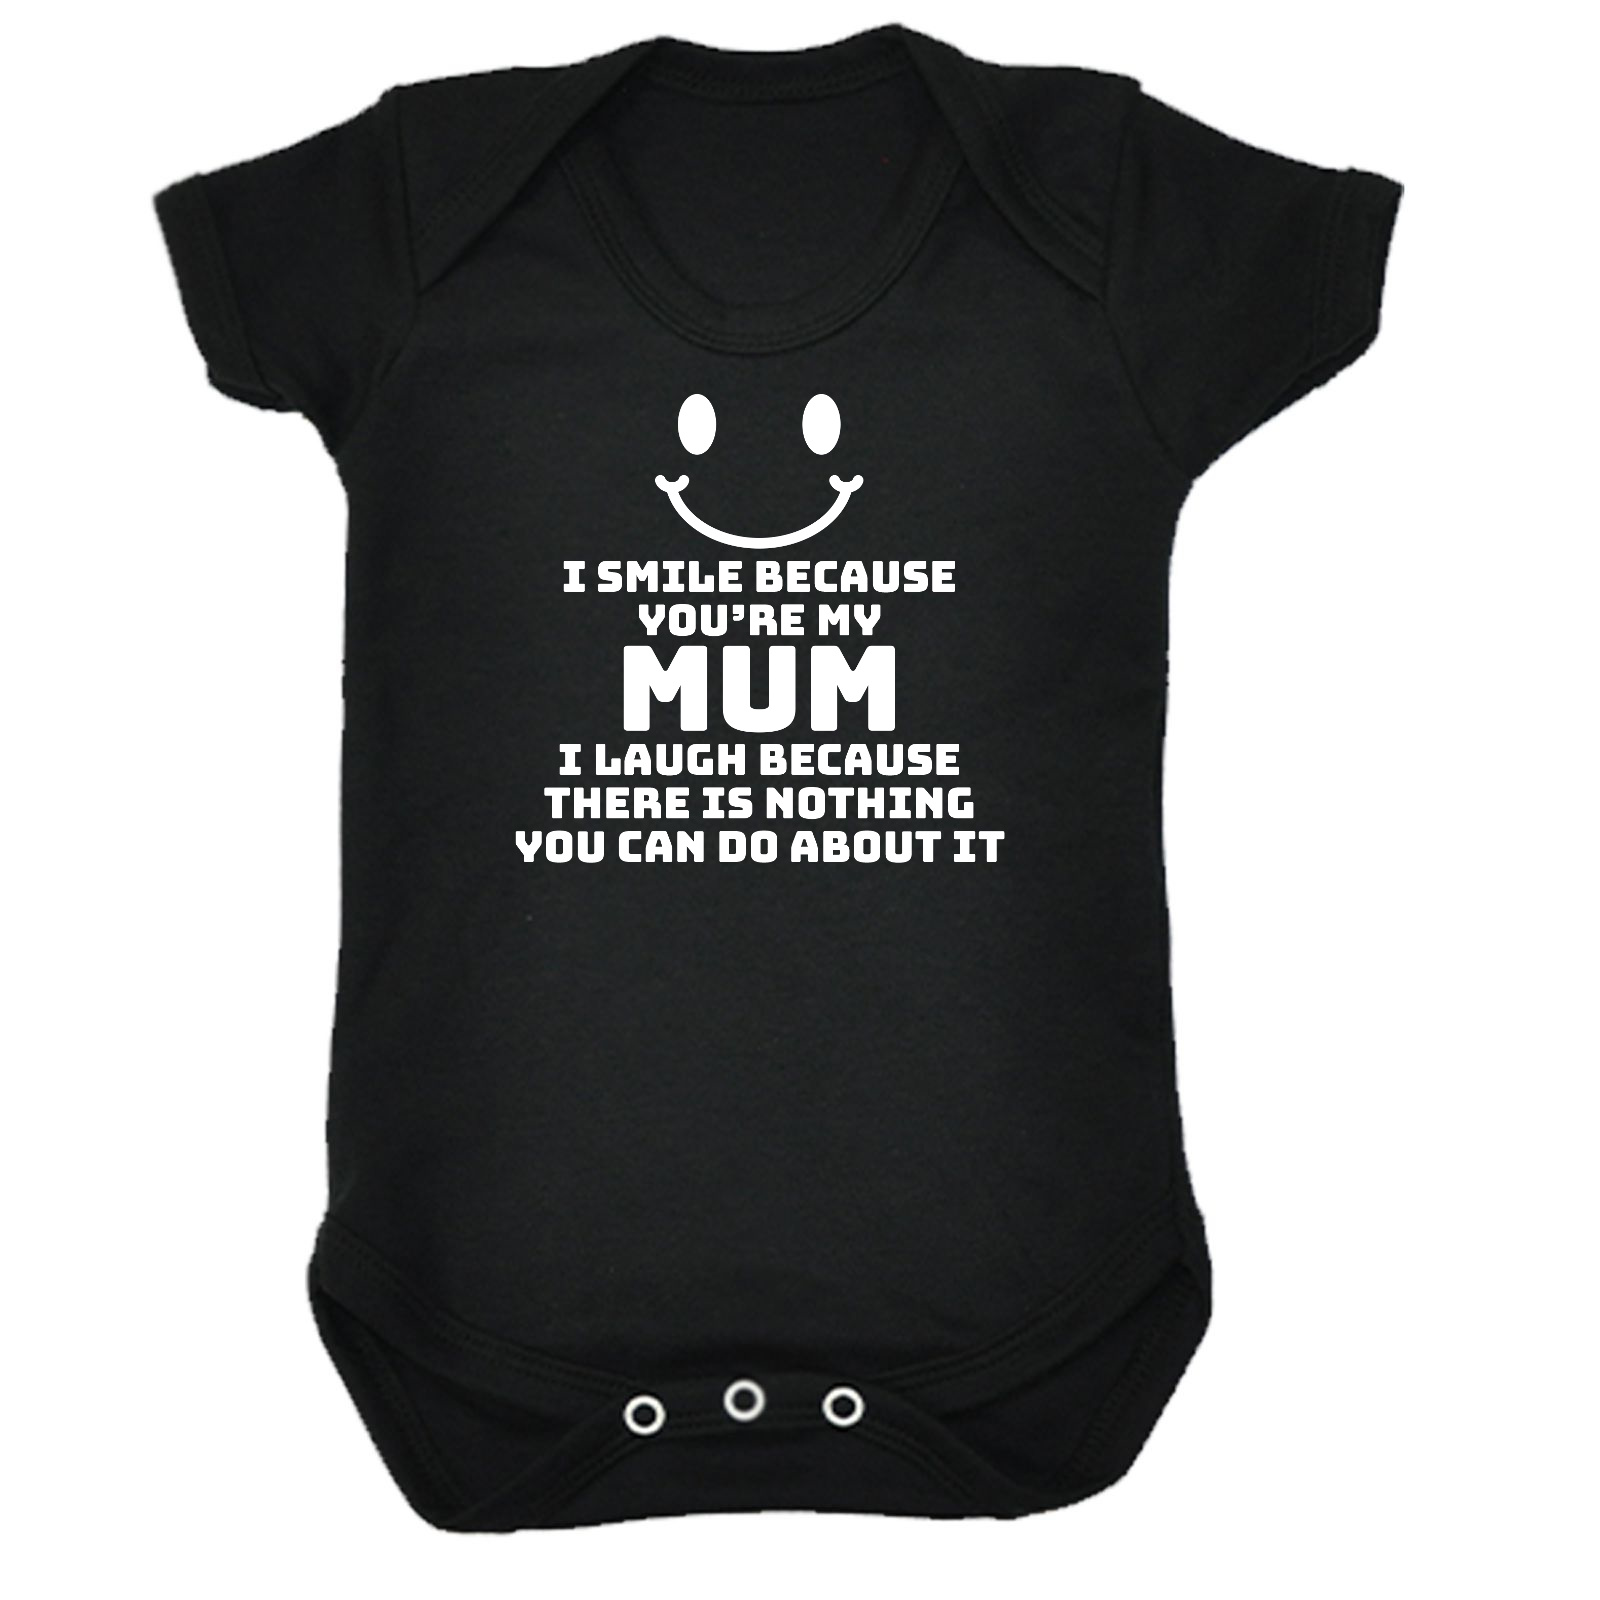 I Smile Because Youre My Mum Funny Baby Infants Soft Babygrow Grow ...